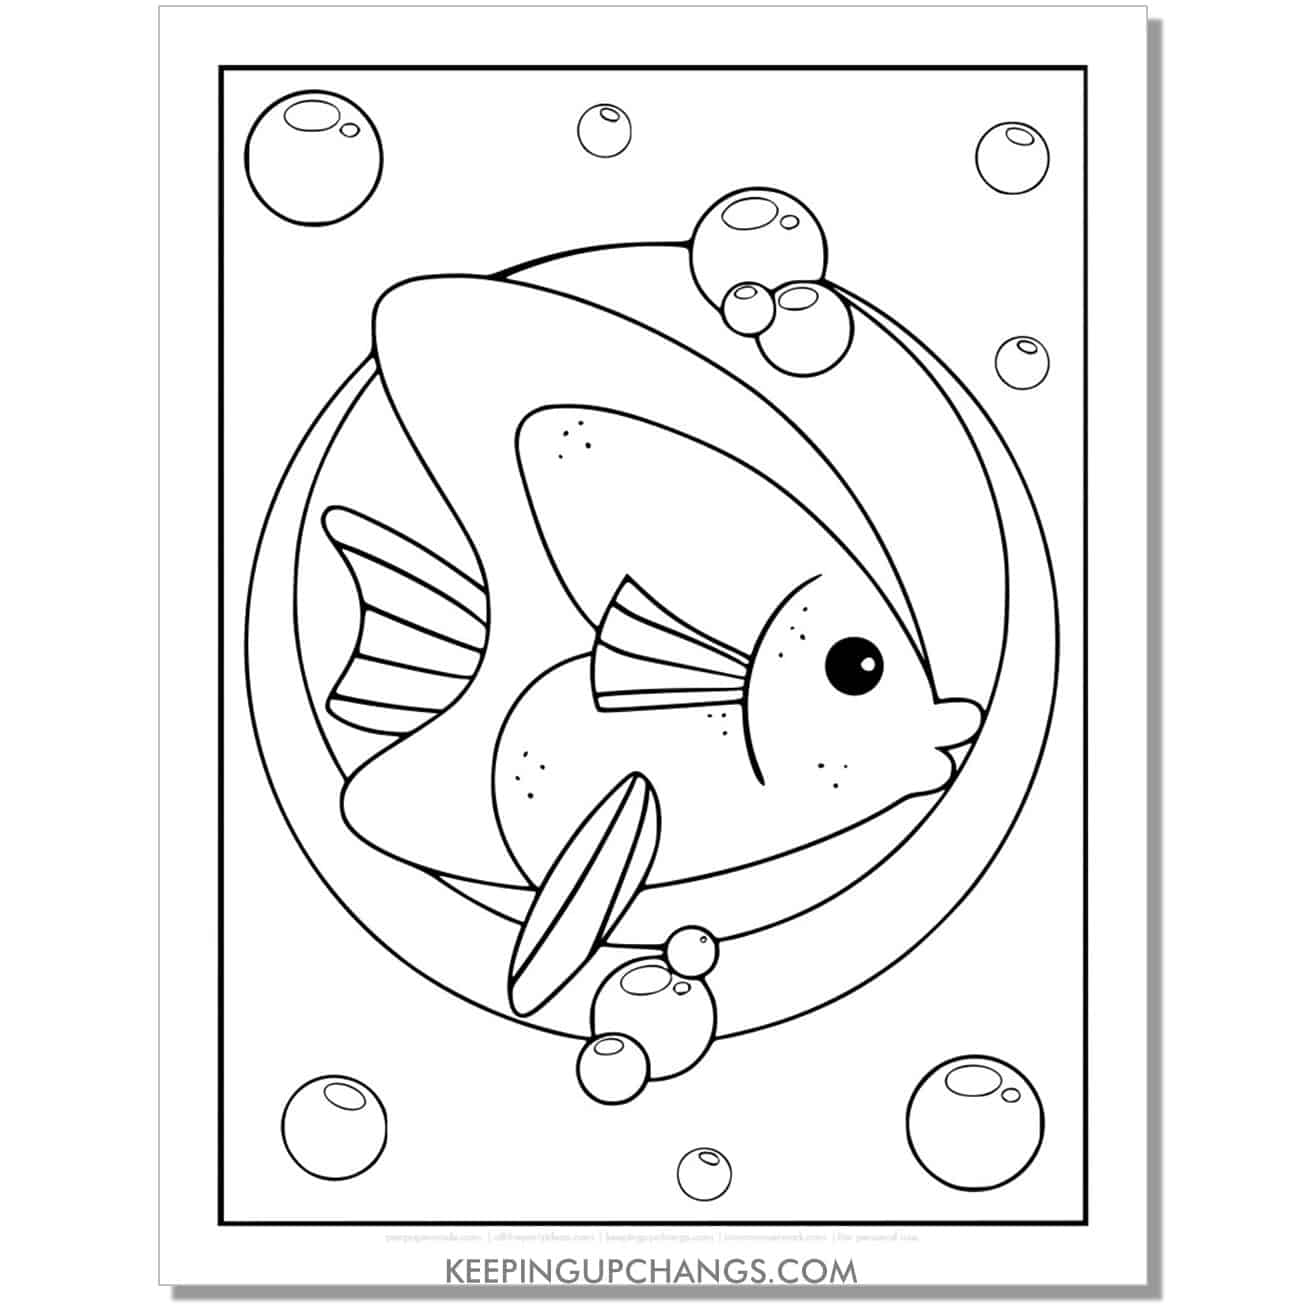 free full size bubbles and fish coloring page, sheet.